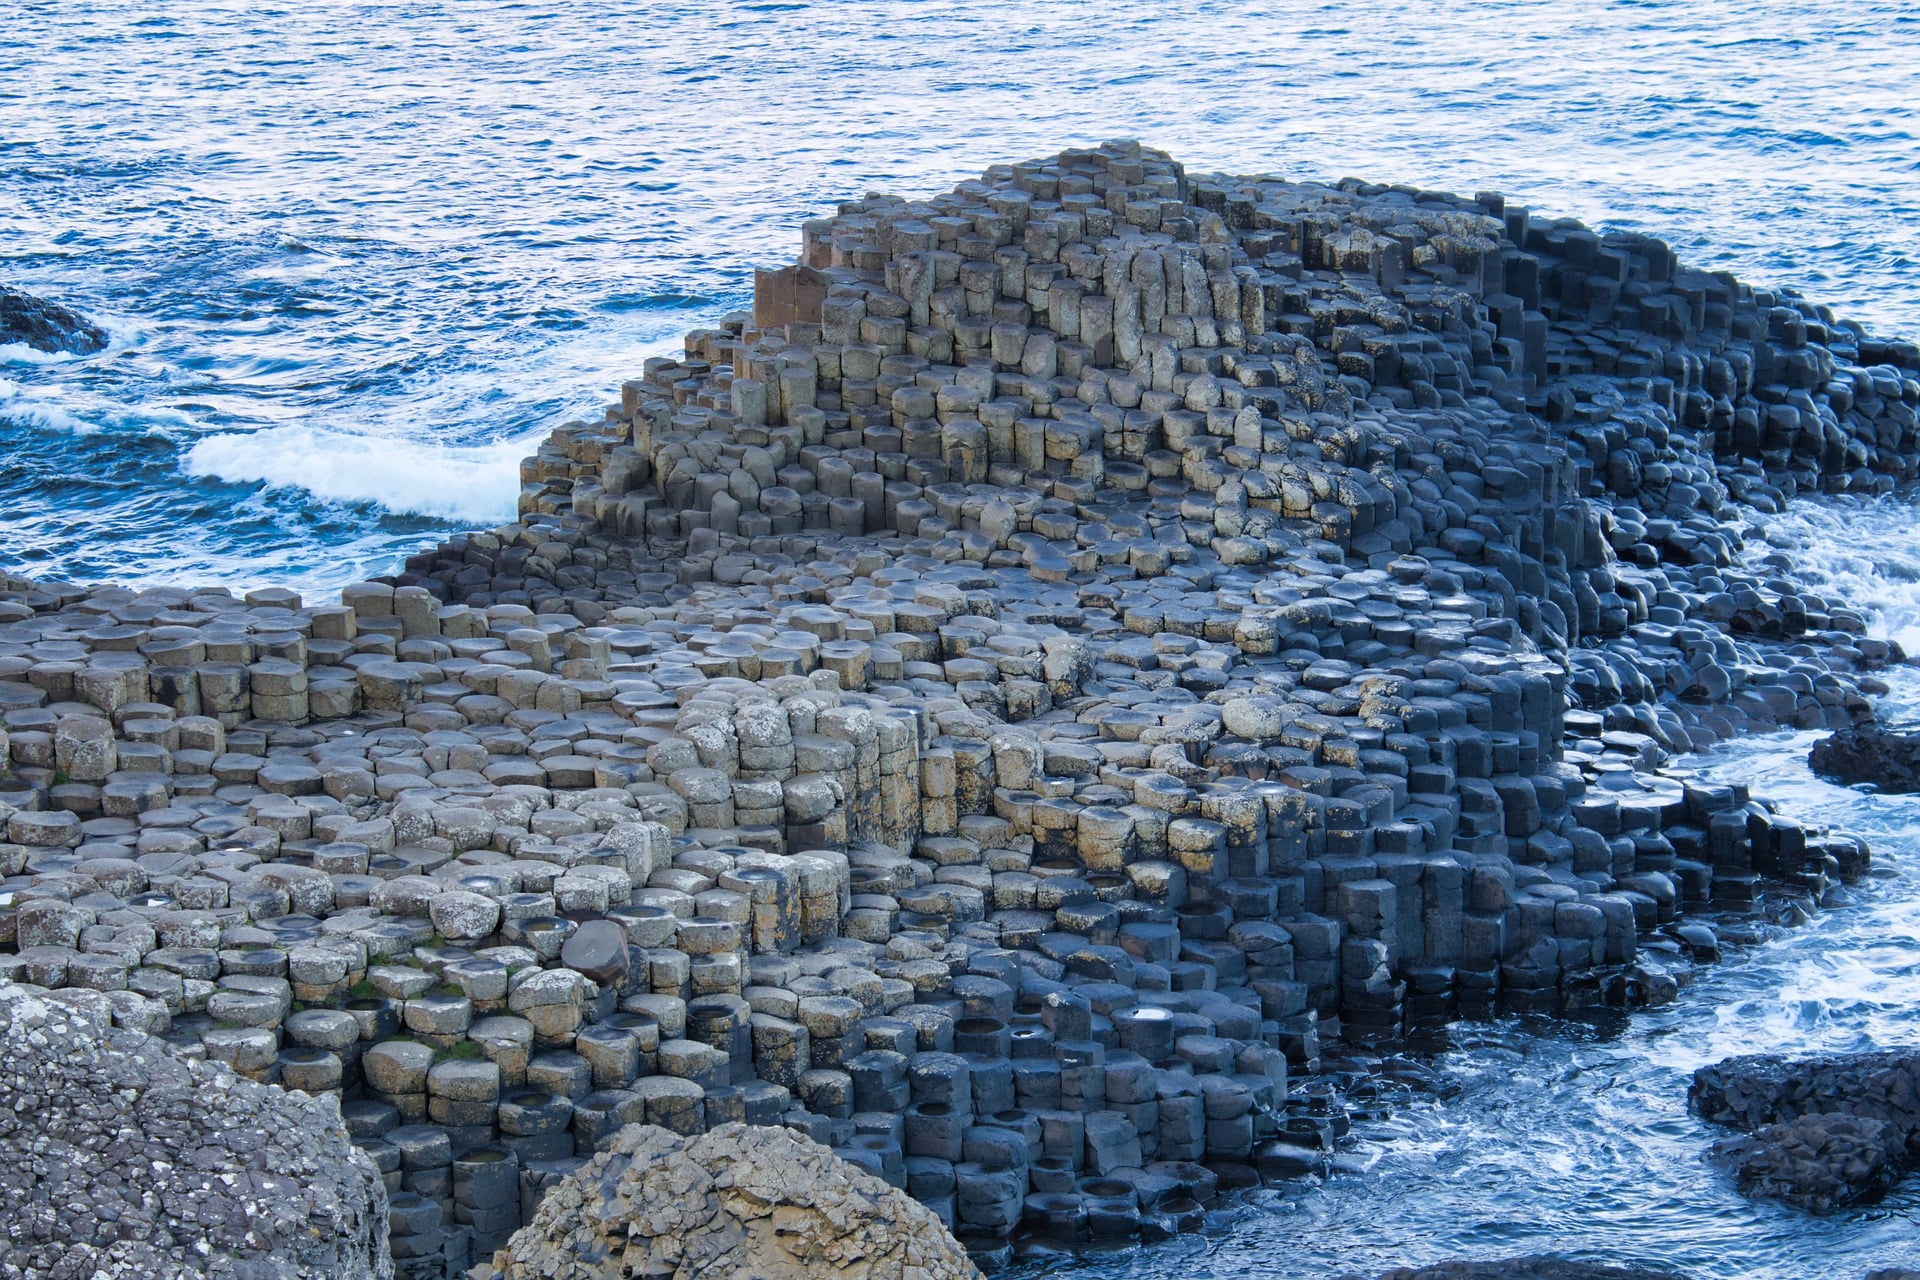 Giant’s Causeway is a cool place to visit in Ireland